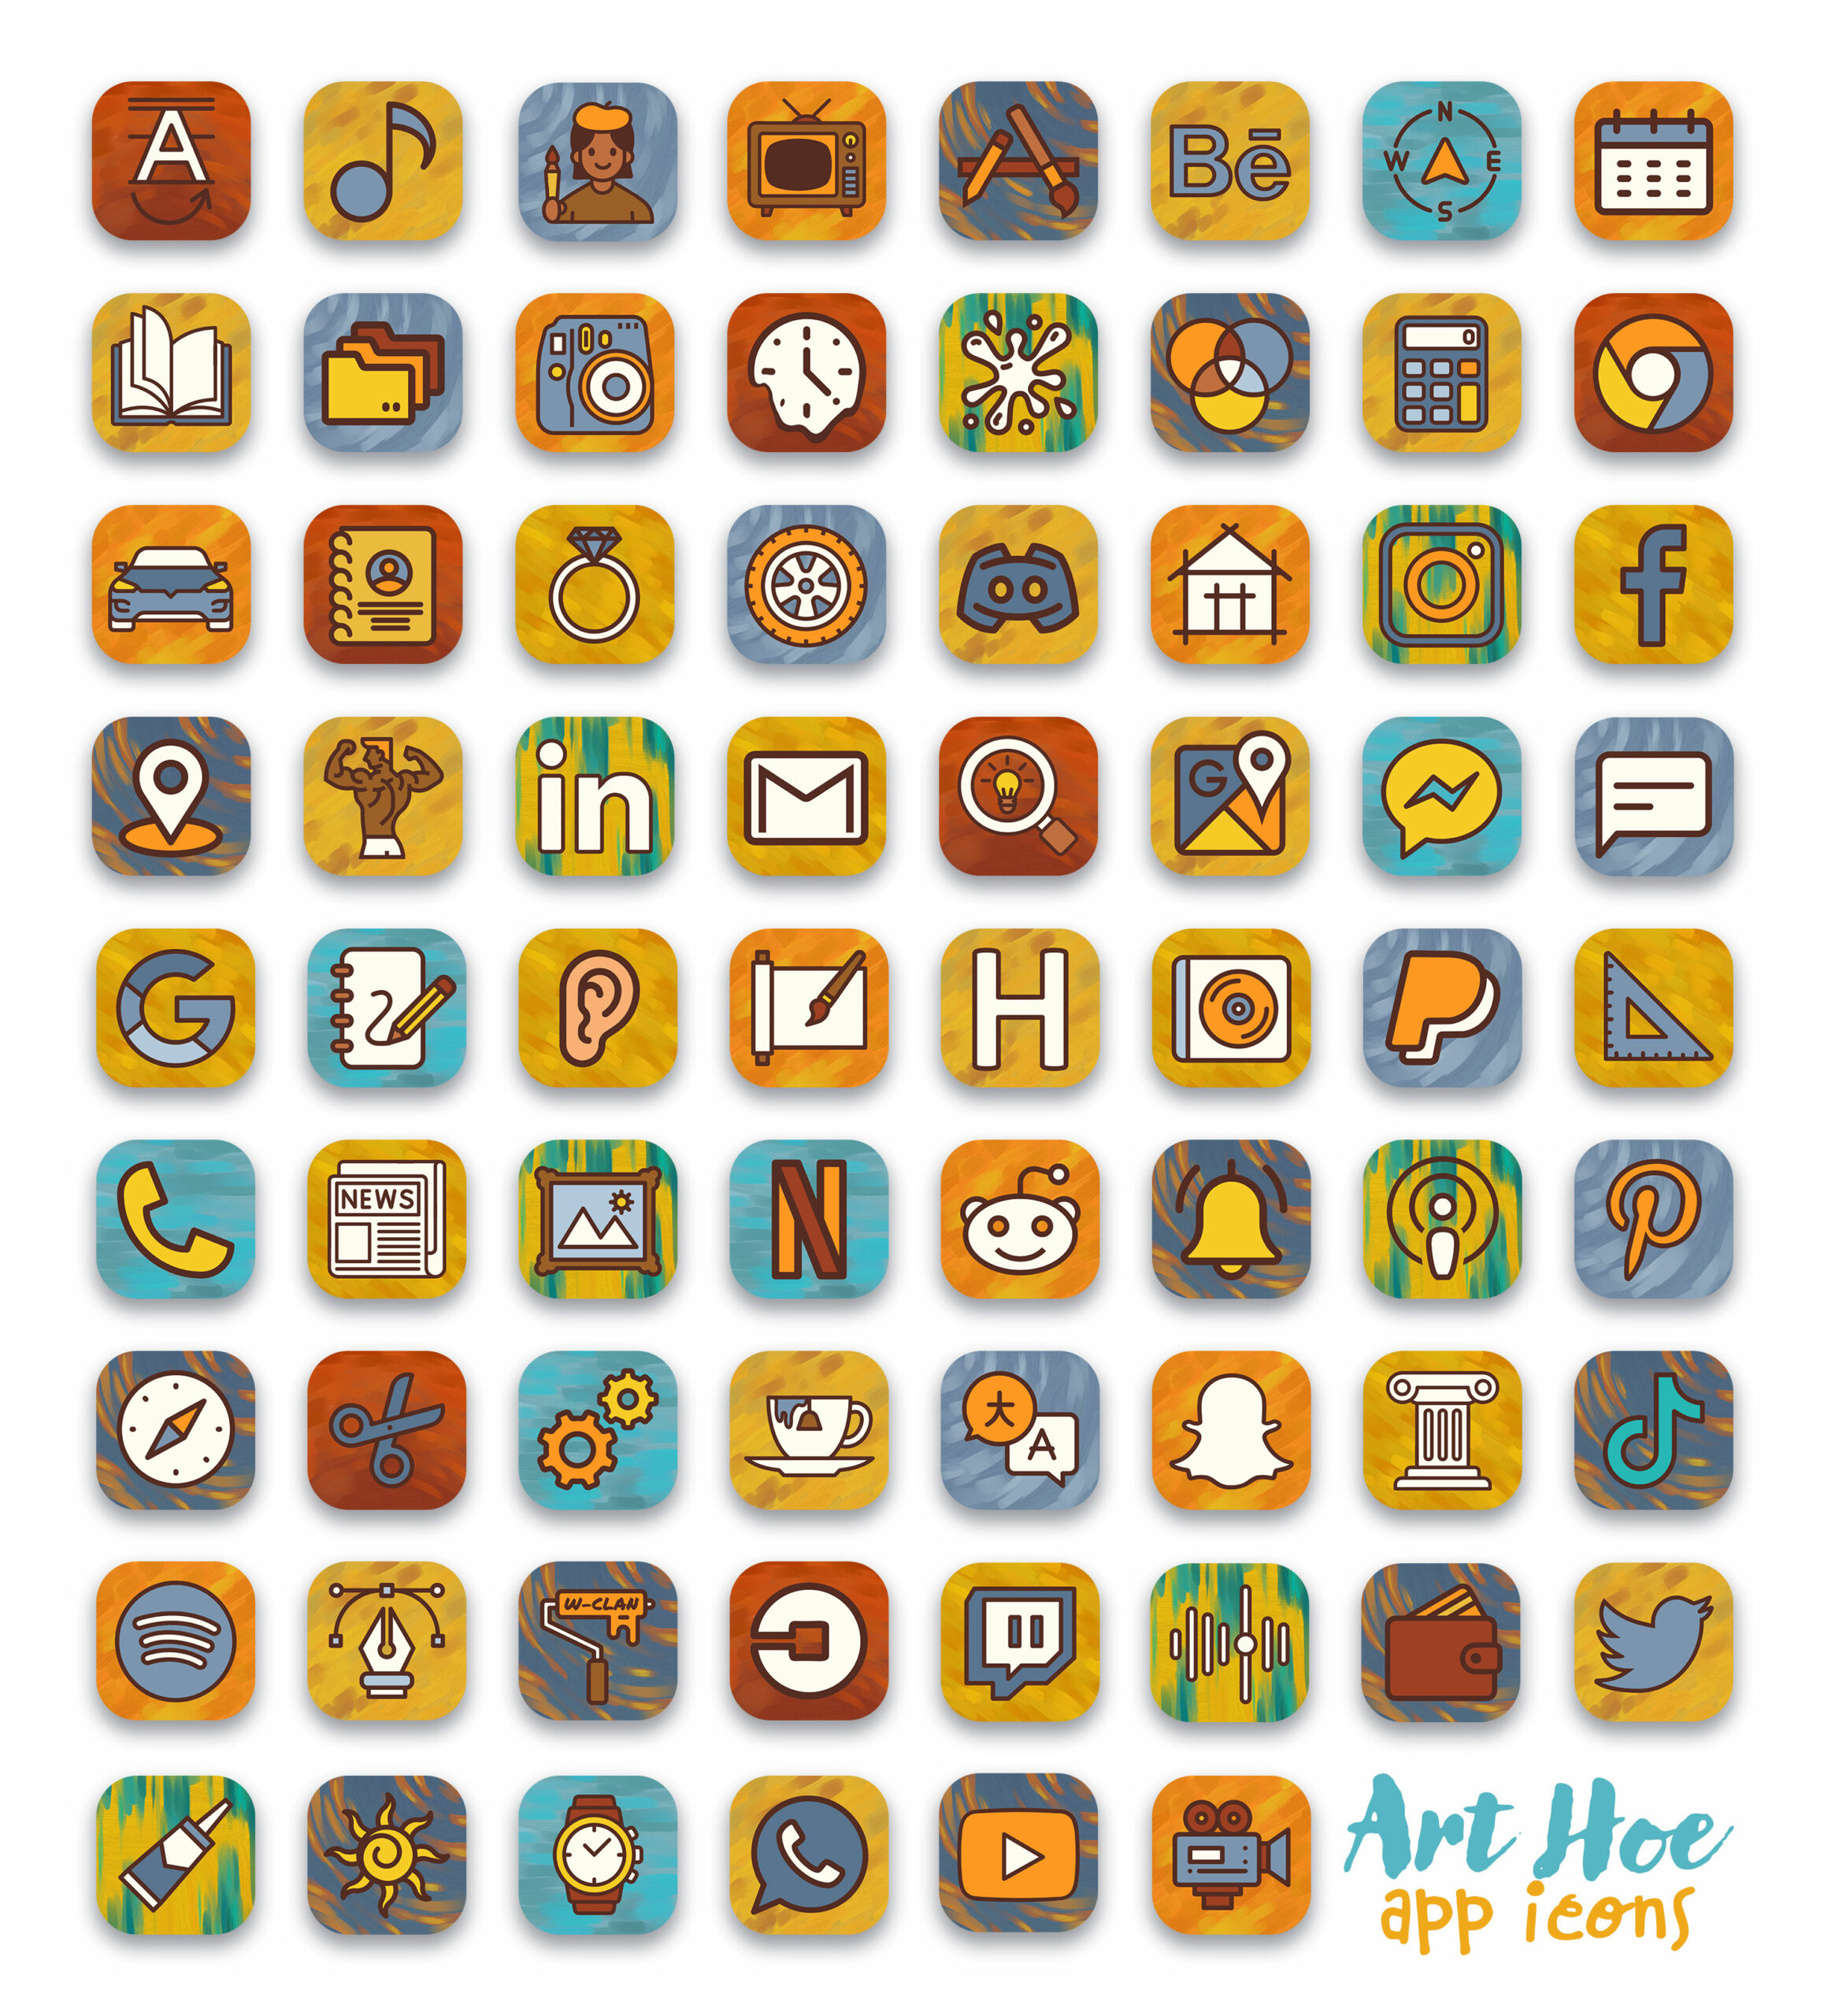 art hoe app icons pack preview 2